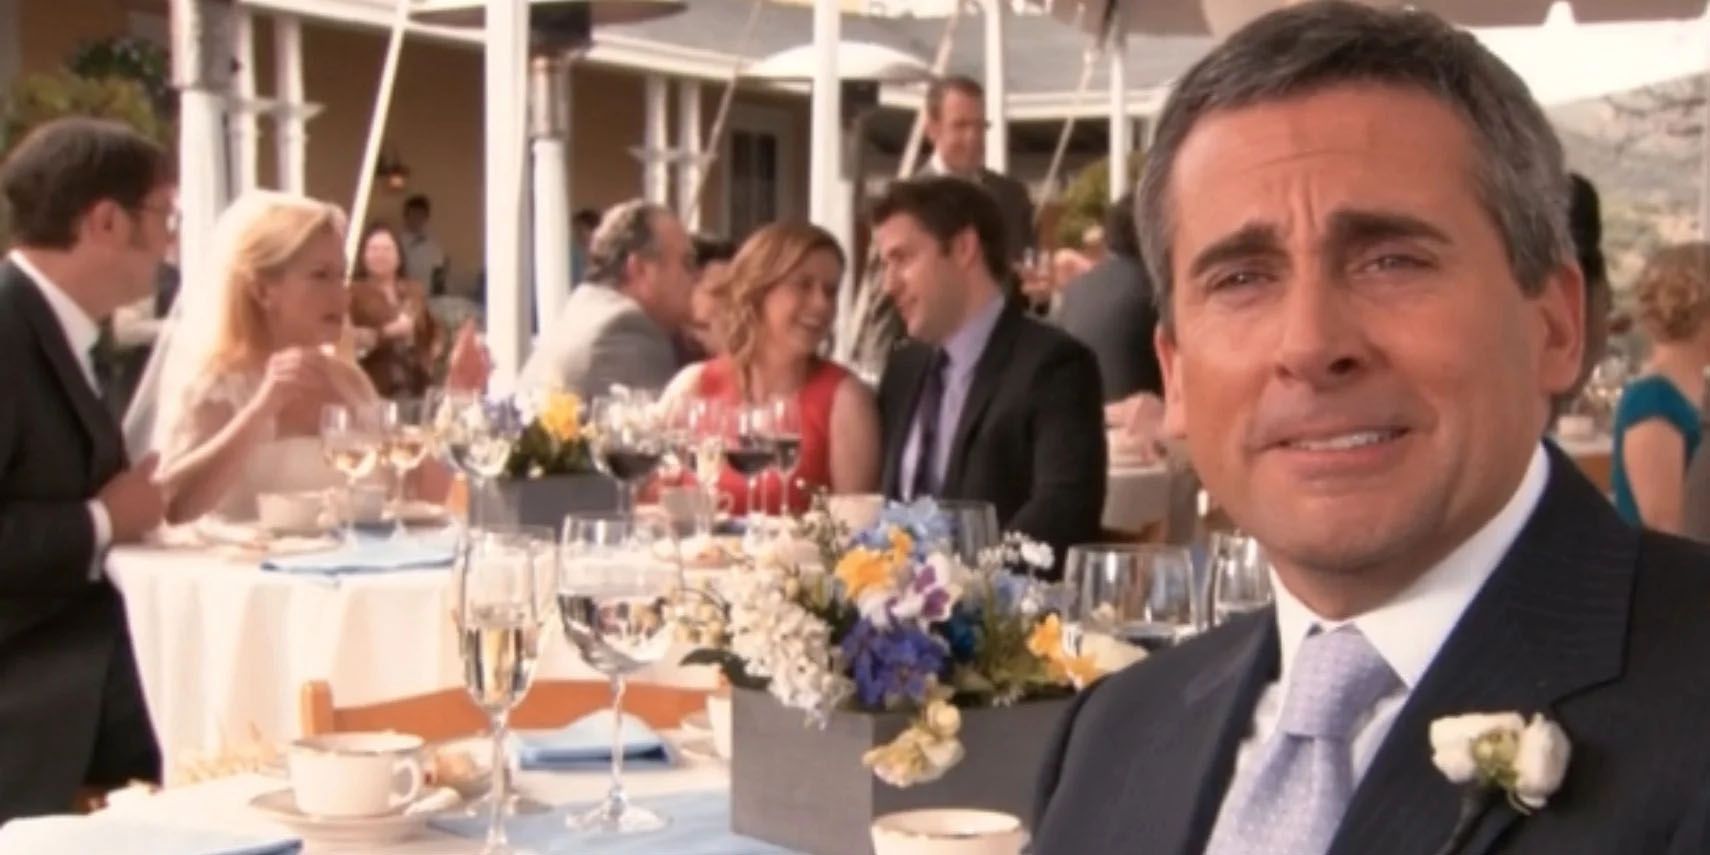 Michael Scott takes a selfie at Dwight's wedding the series final of The Office